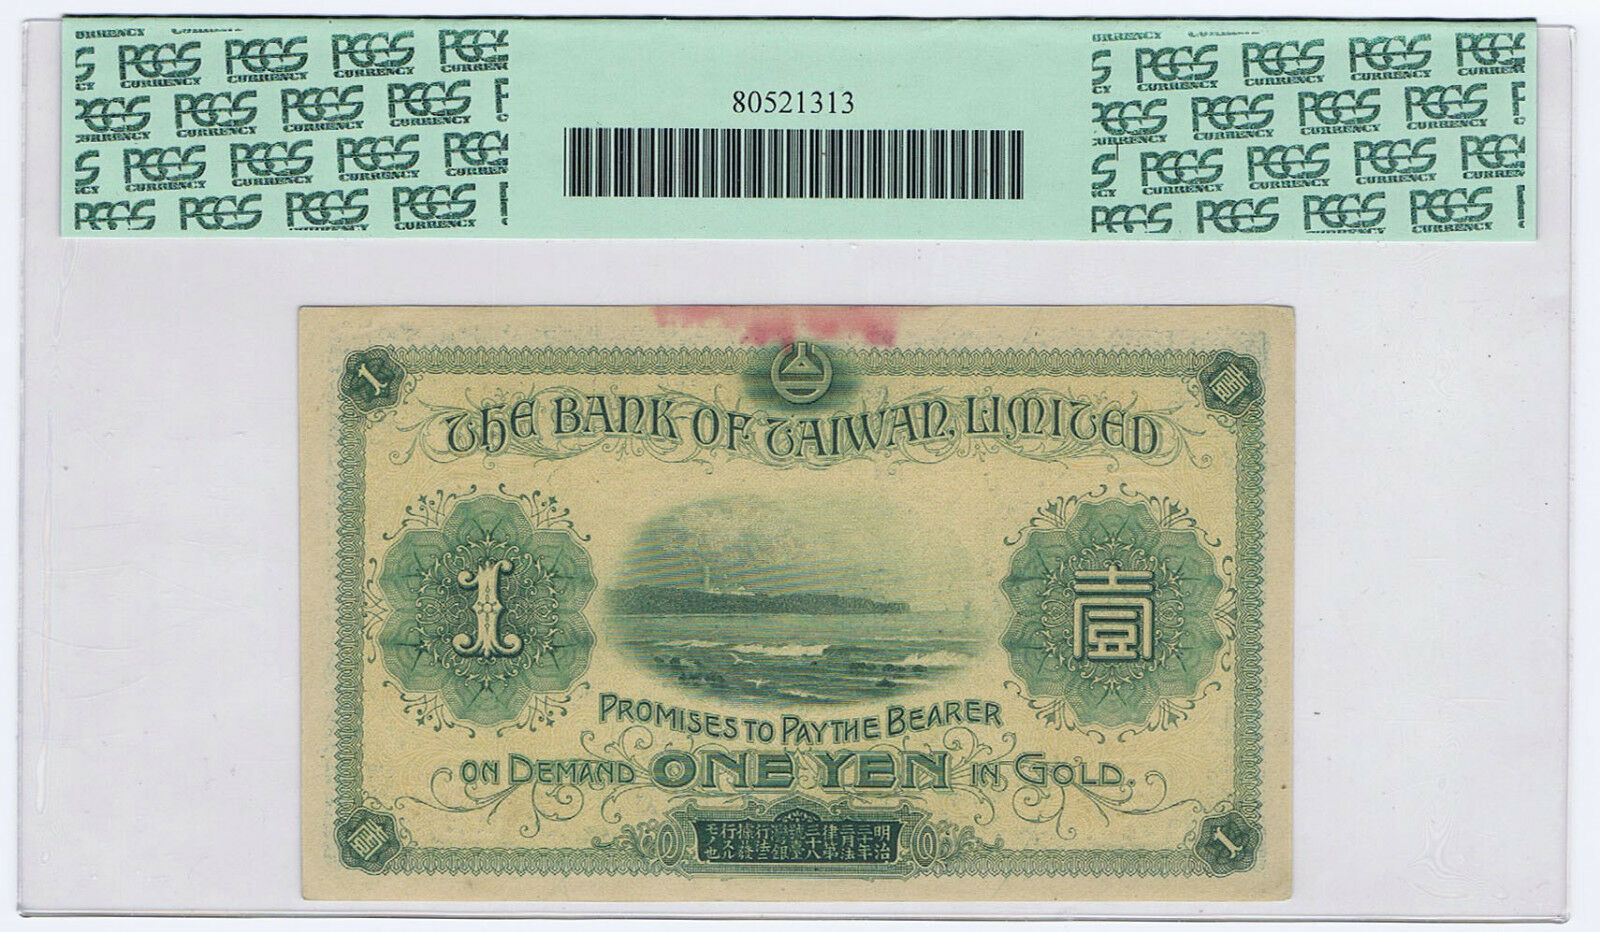 CHINA JAPAN BANK of TAIWAN LTD 1915 P# 1921 YEN in GOLD PCGS SLAB GRADED CAN 58